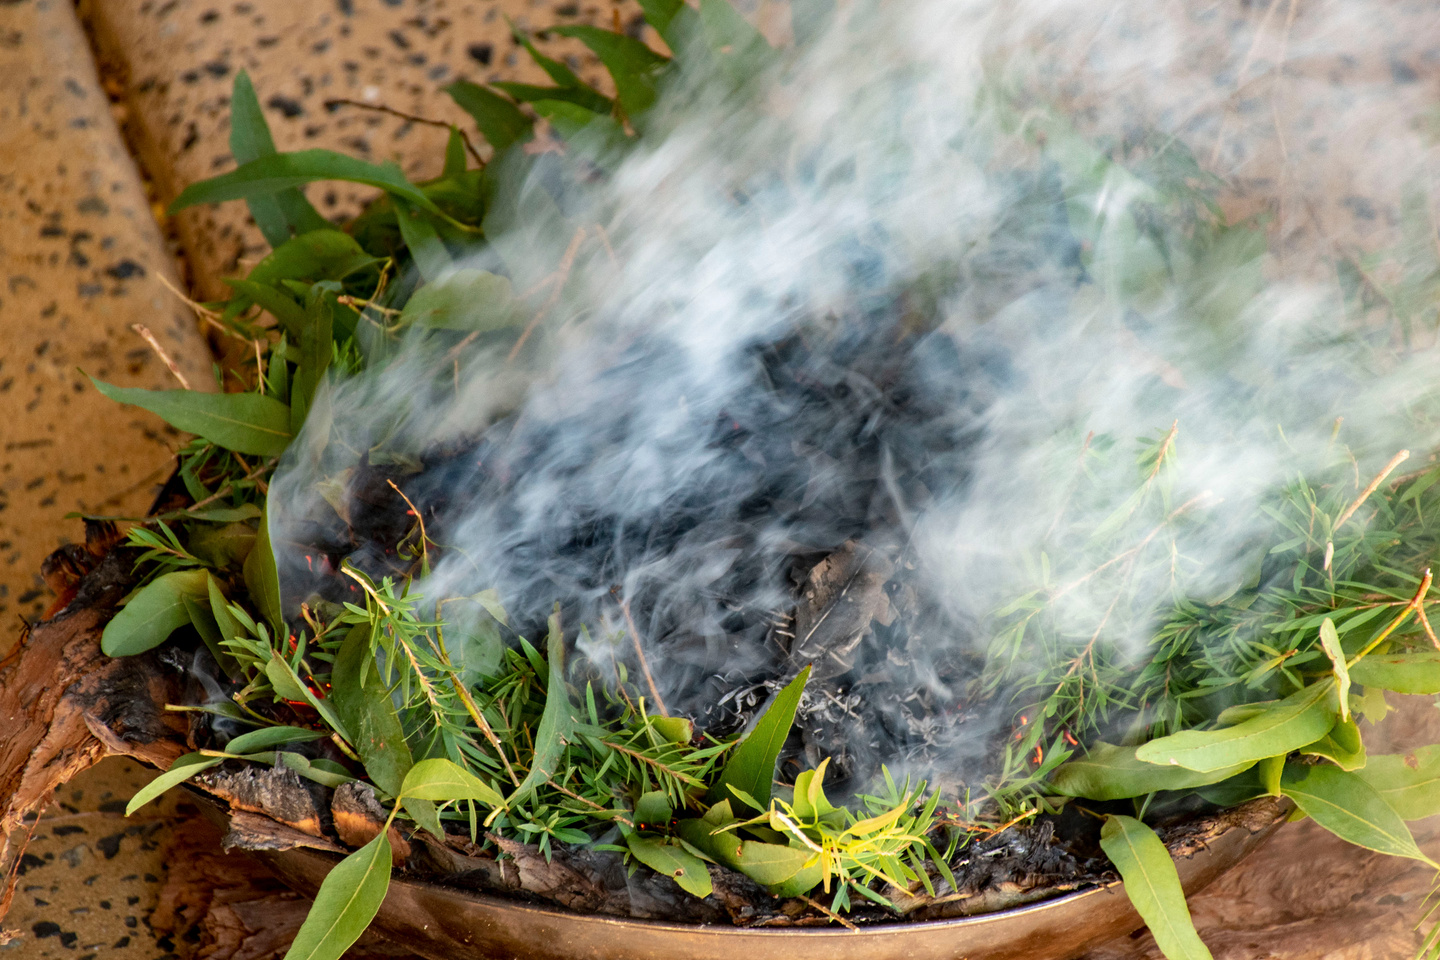 Flames and smoke from bark vessel and leaves used in traditional Australian Aboriginal smoking ceremony.